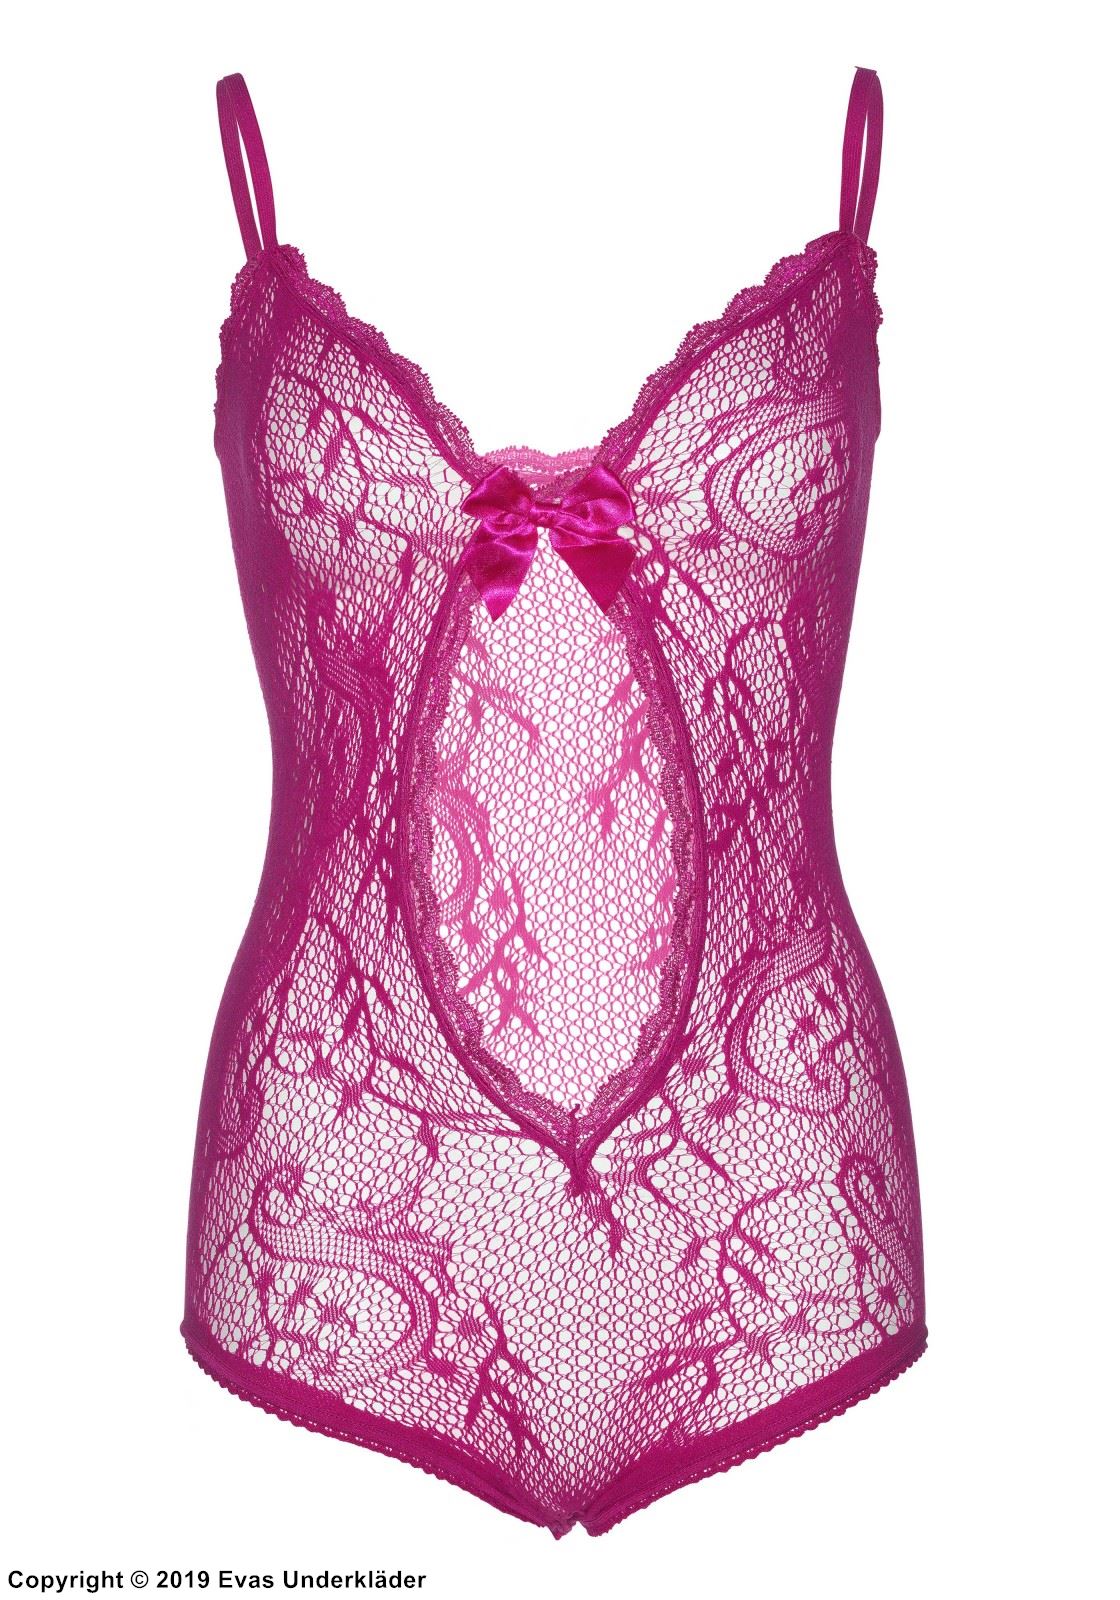 Keyhole cut out lace teddy